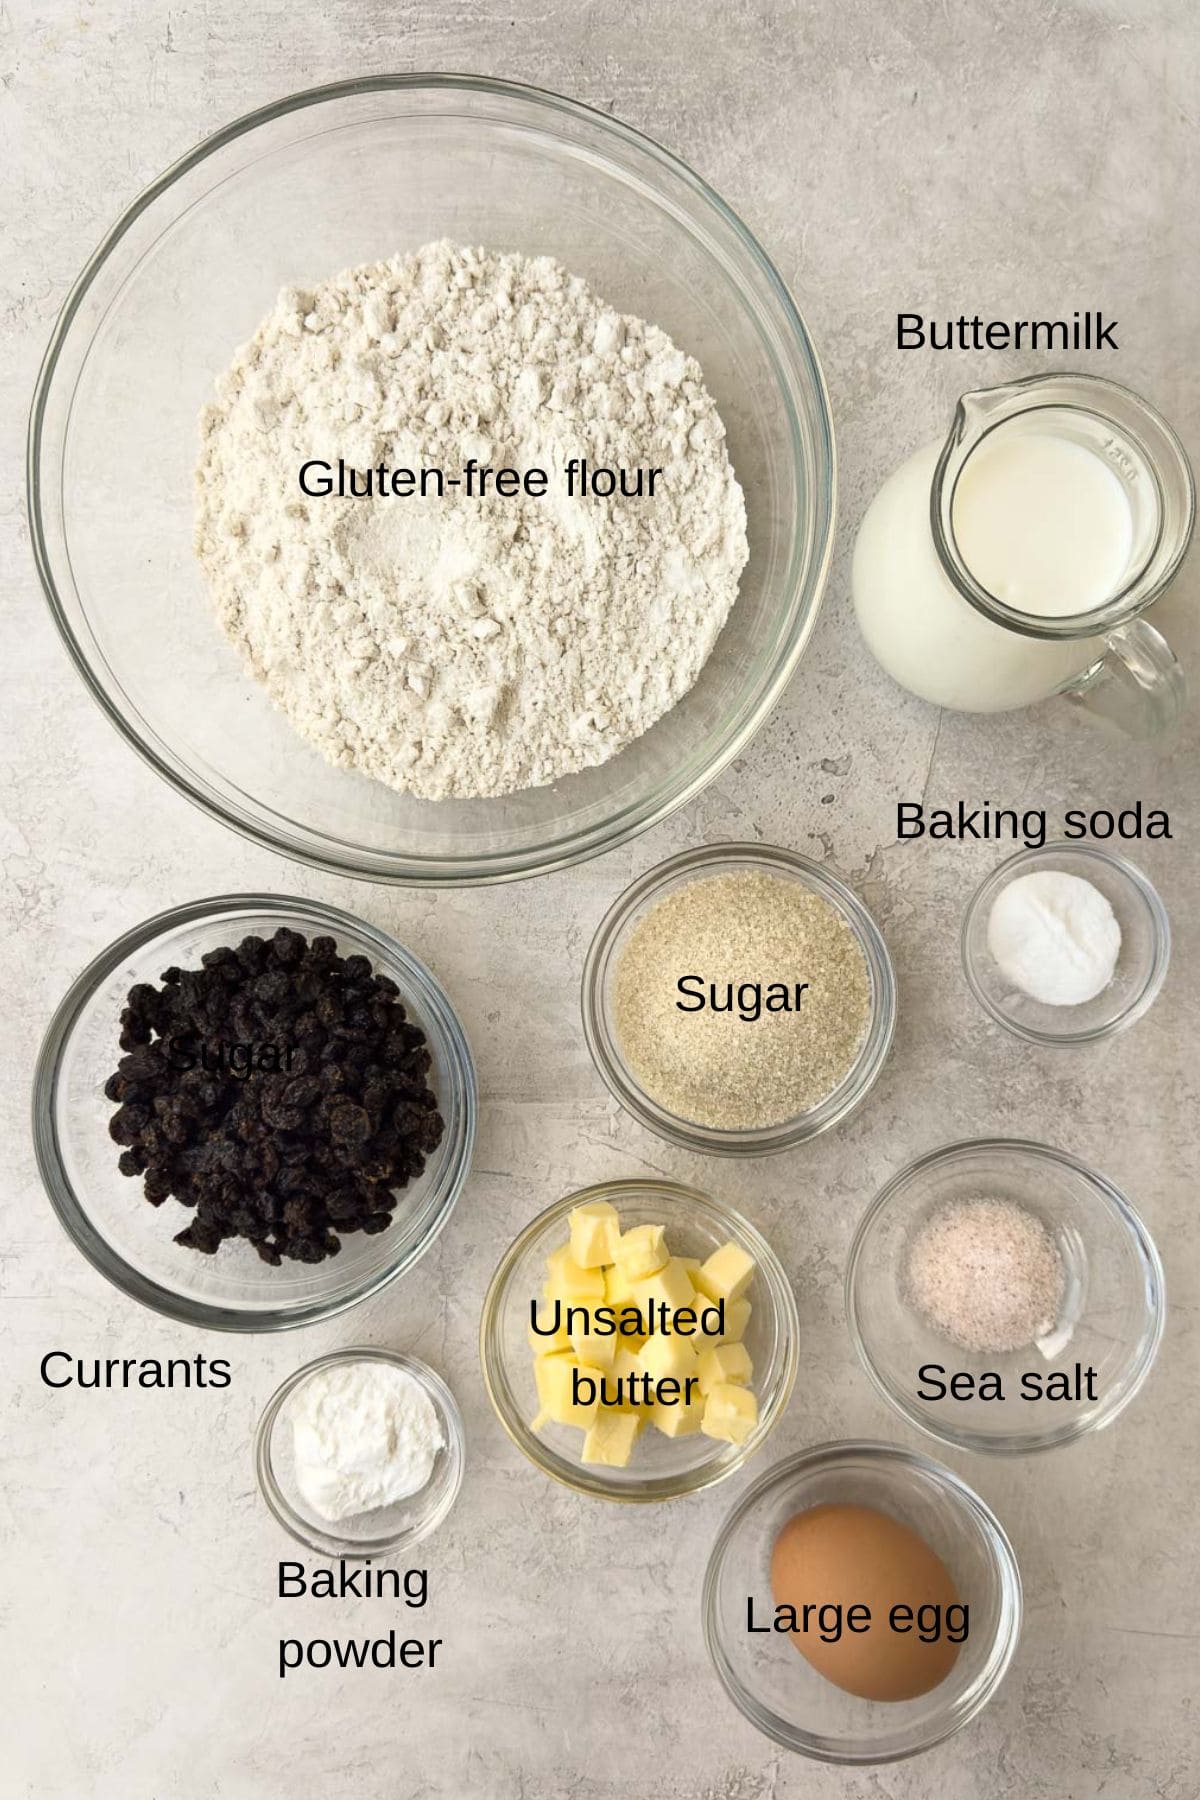 Irish soda bread ingredients with labels on a counter.